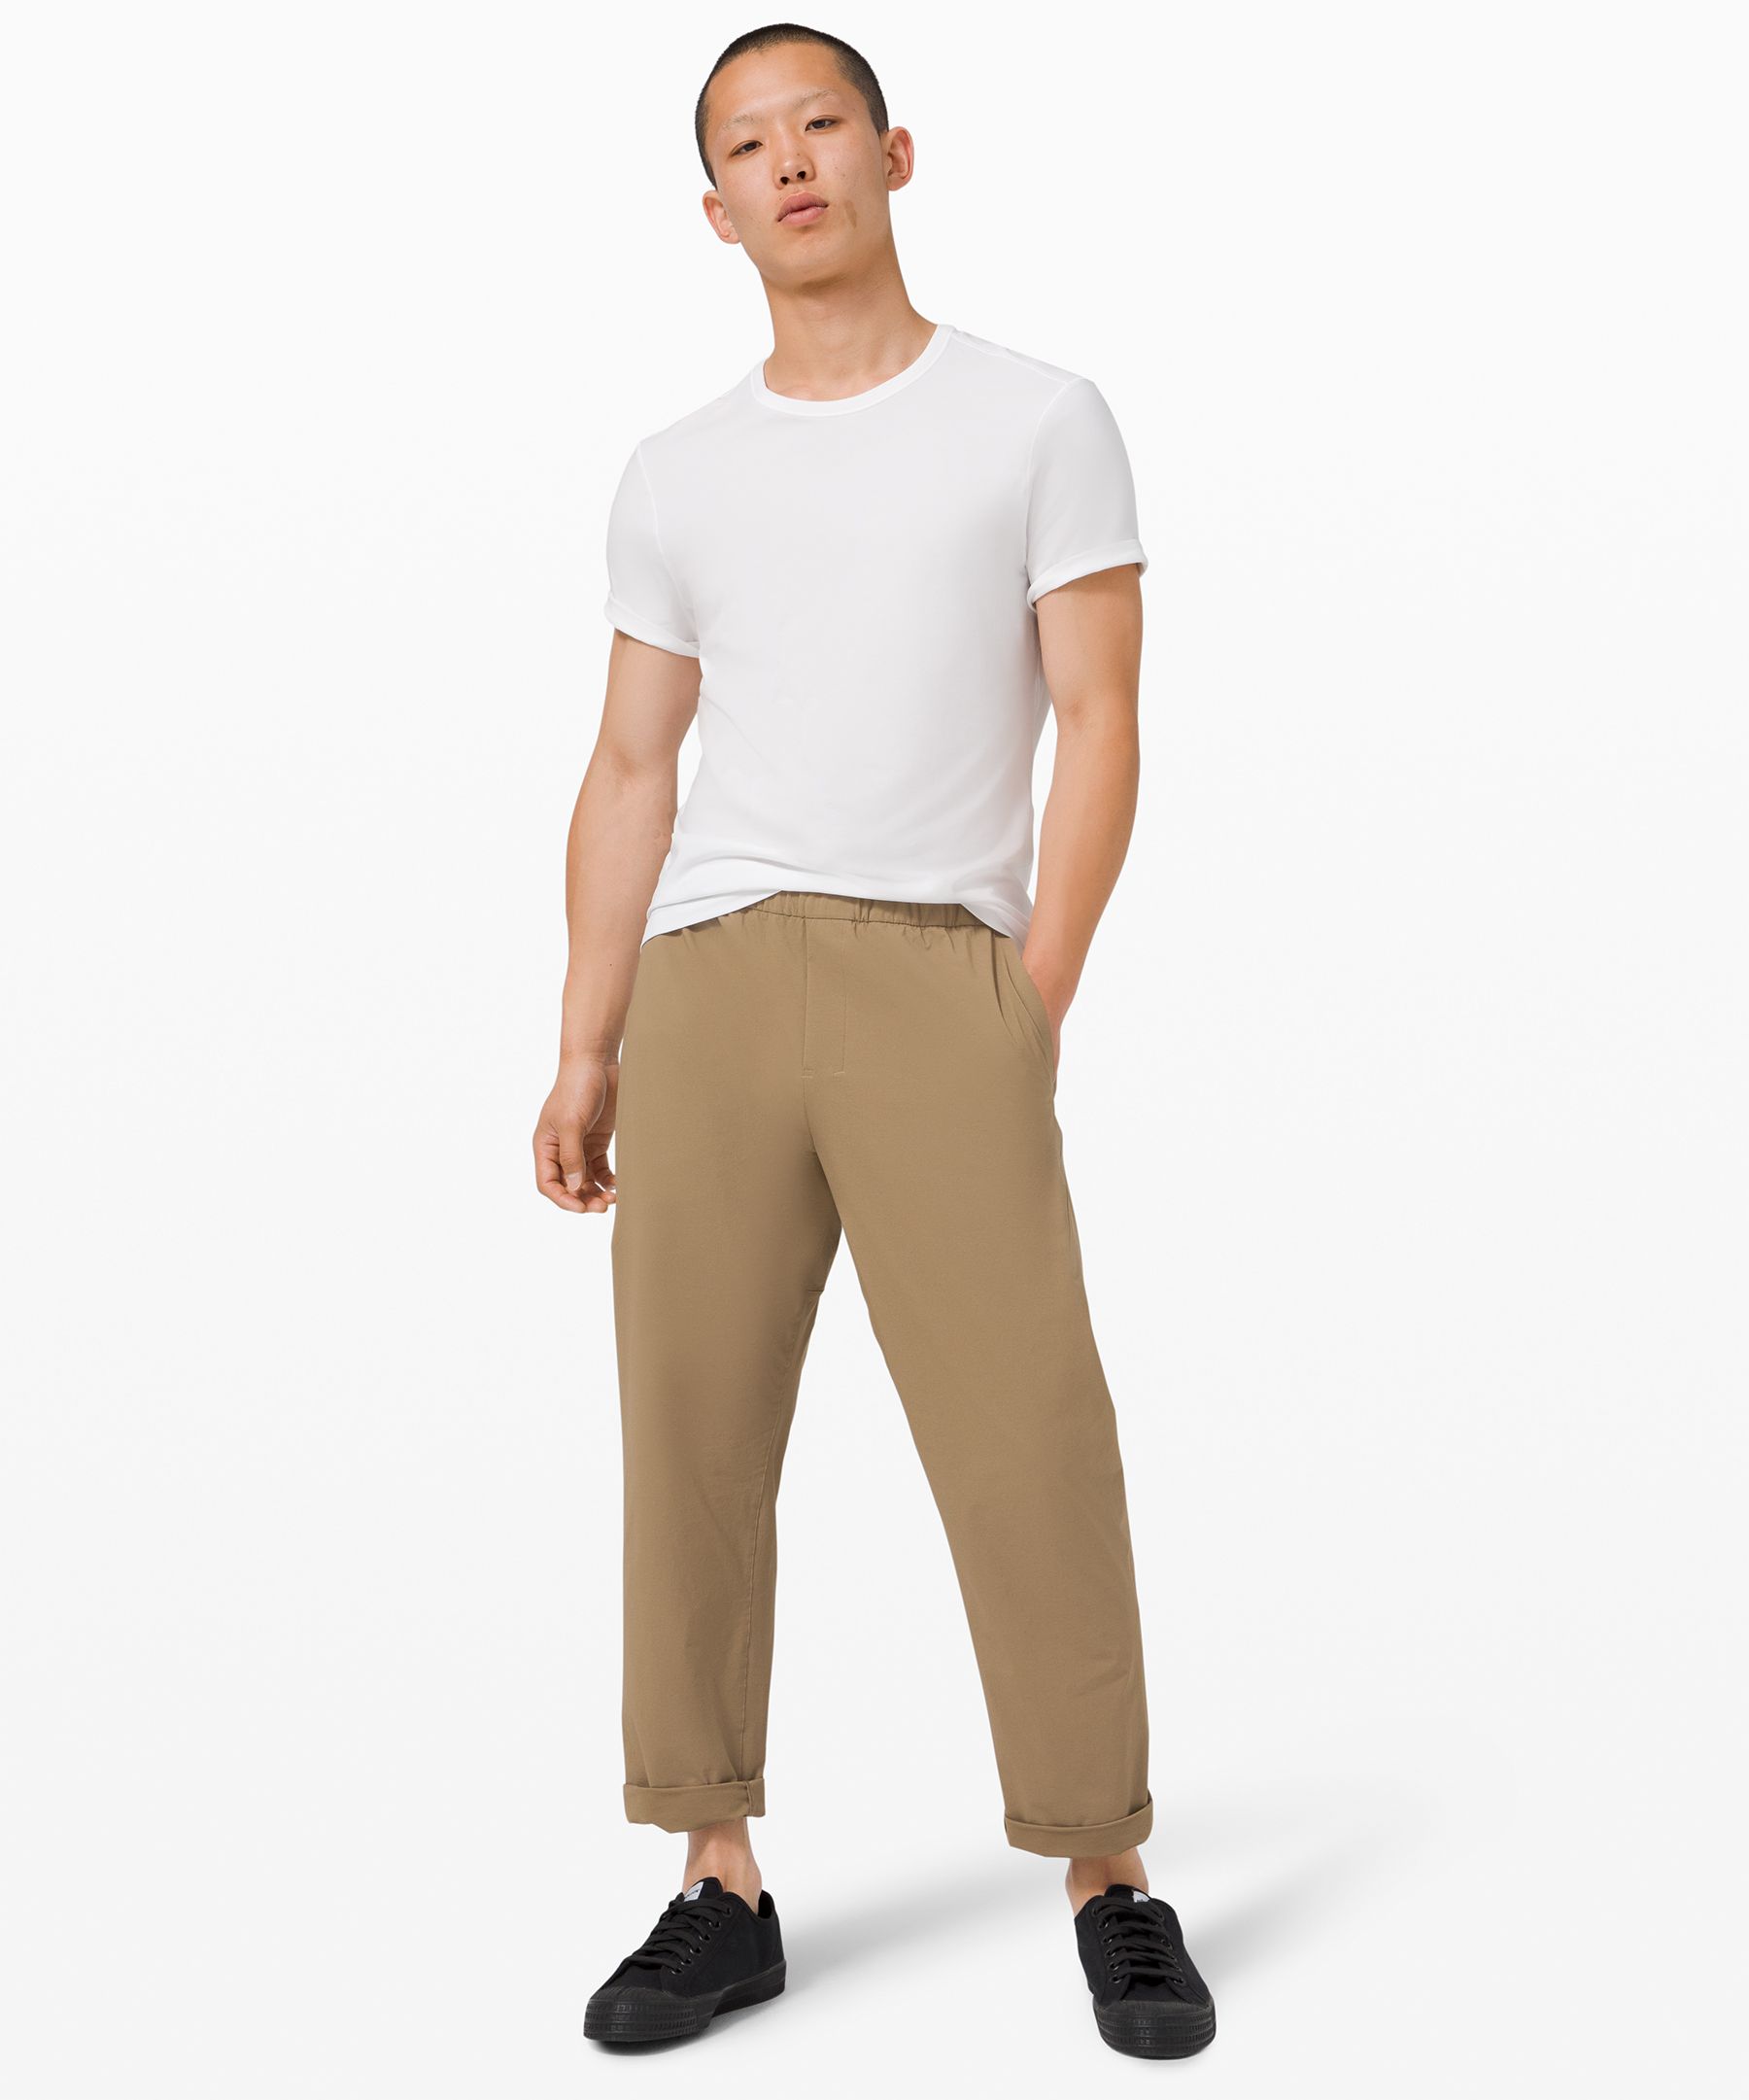 lululemon pants stretched out